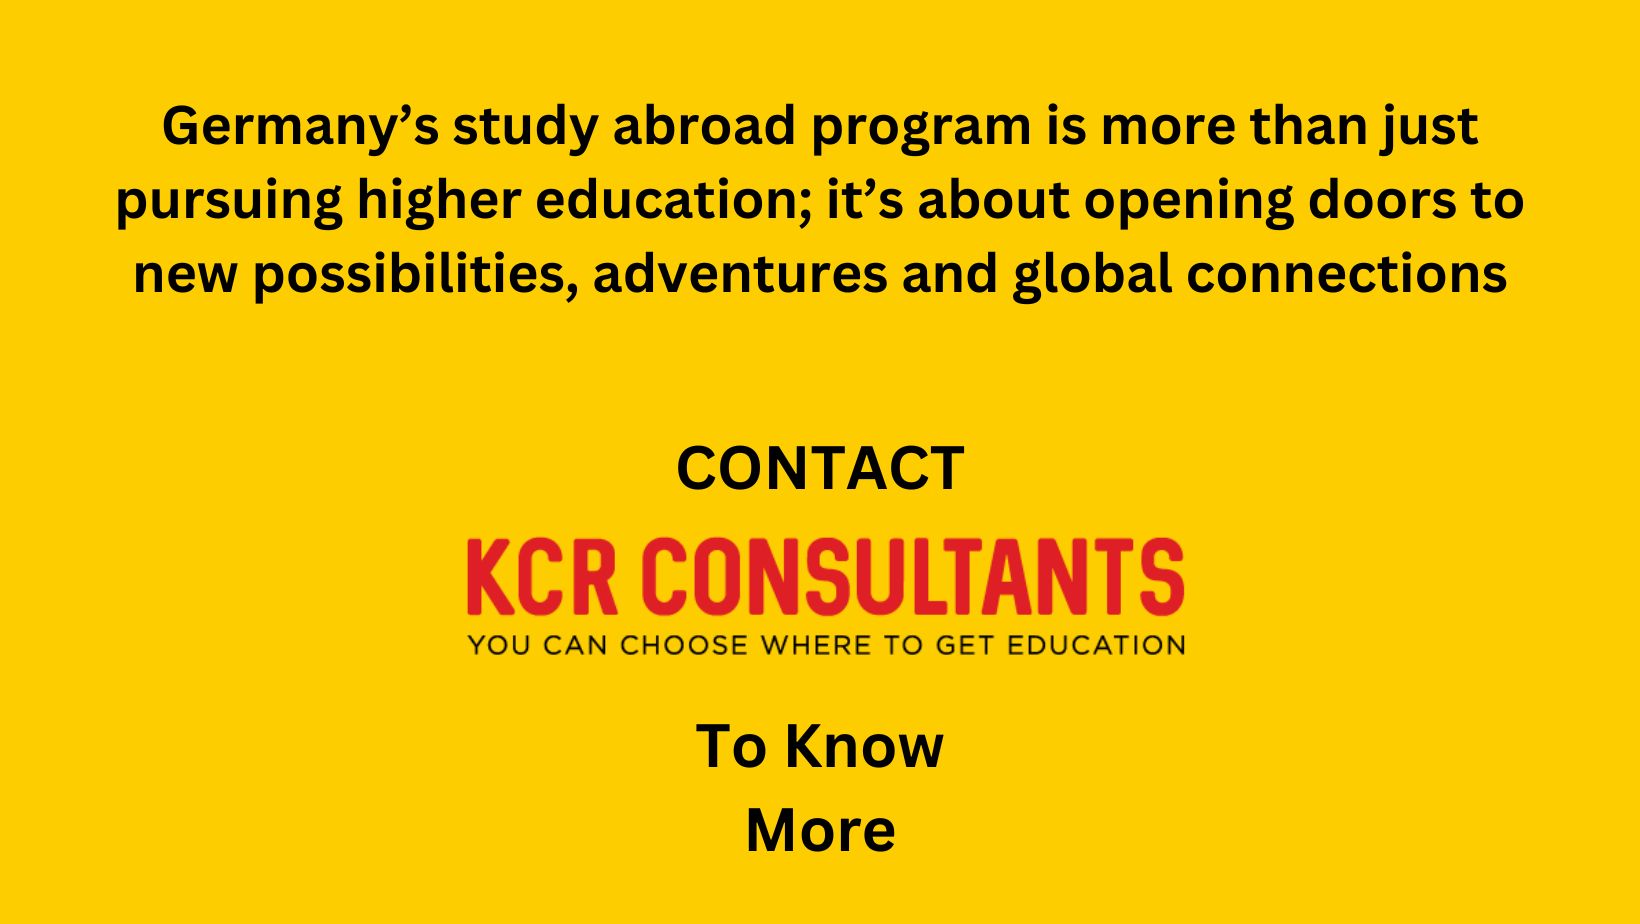 GERMANY STUDY ABROAD - KCR CONSULTANTS - Contact us